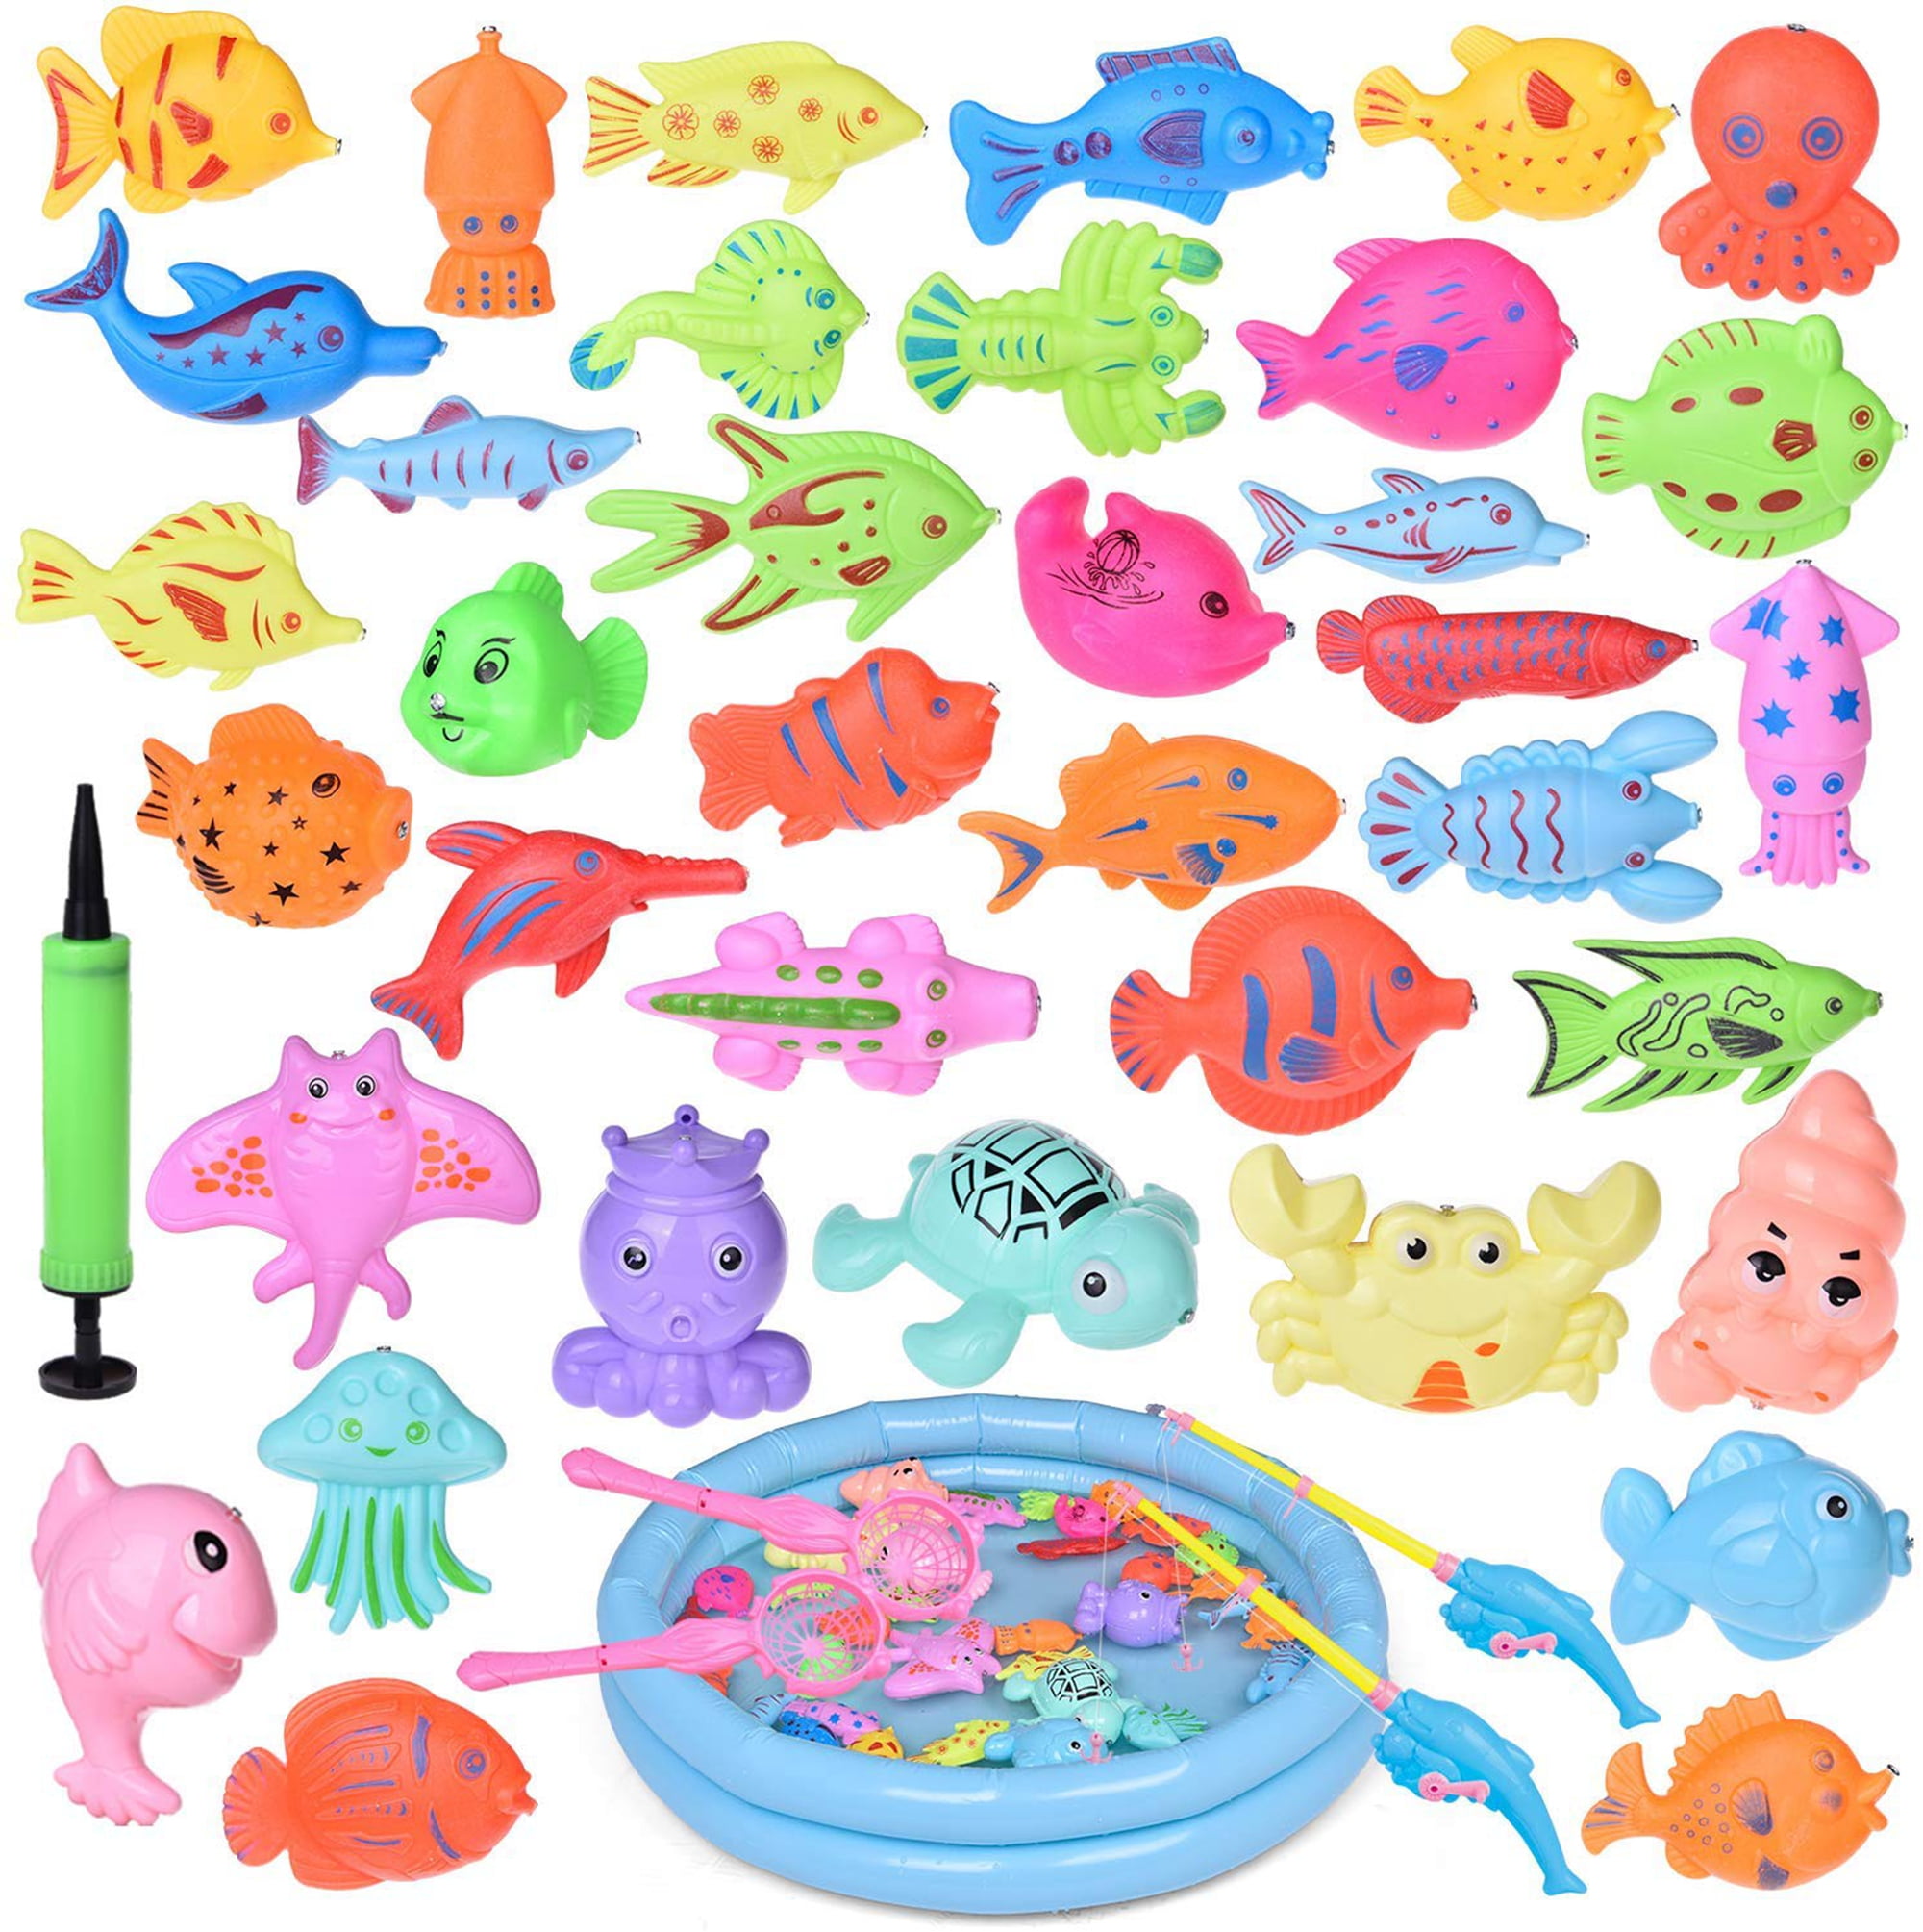 Ocean Jigsaw Fishing Game Board Magnetic Rod Wooden Toy Baby's Puzzle Gift 